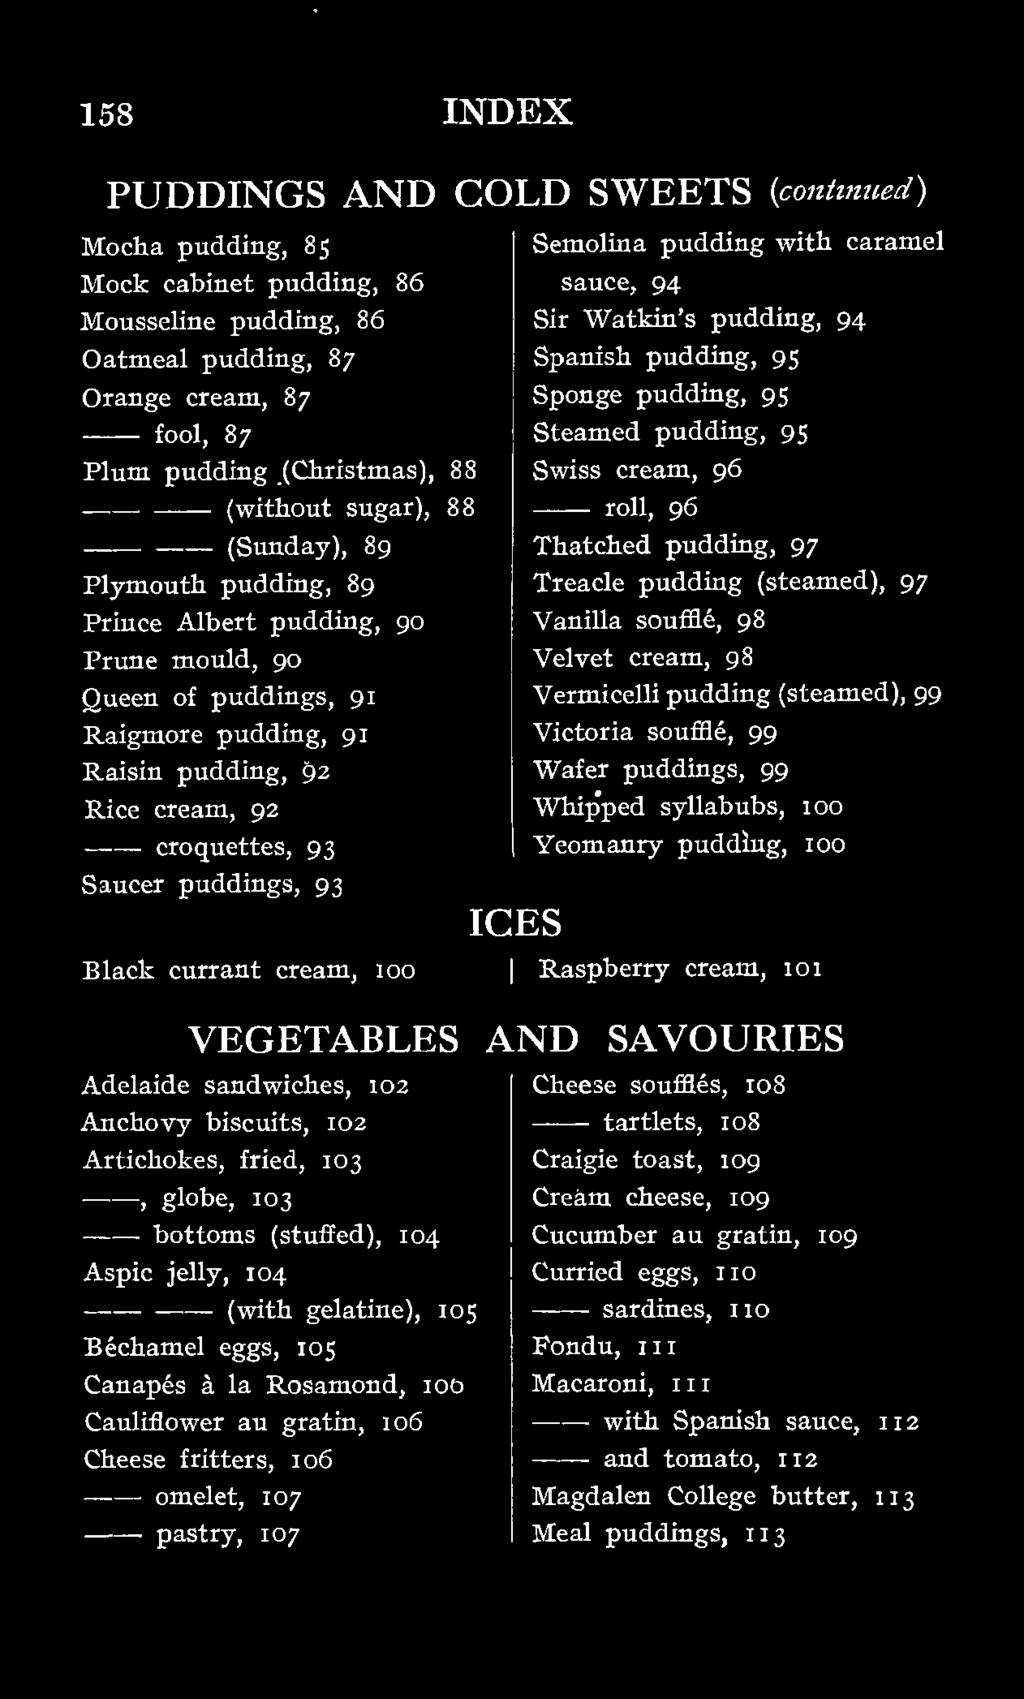 ould, 90 Queen of puddings, 91 Raigmore pudding, 91 Raisin pudding, 92 Rice cream, 92 croquettes, 93 Saucer puddings, 93 Black currant cream, 100 VEGETABLES Adelaide sandwiches, 103 Anchovy biscuits,